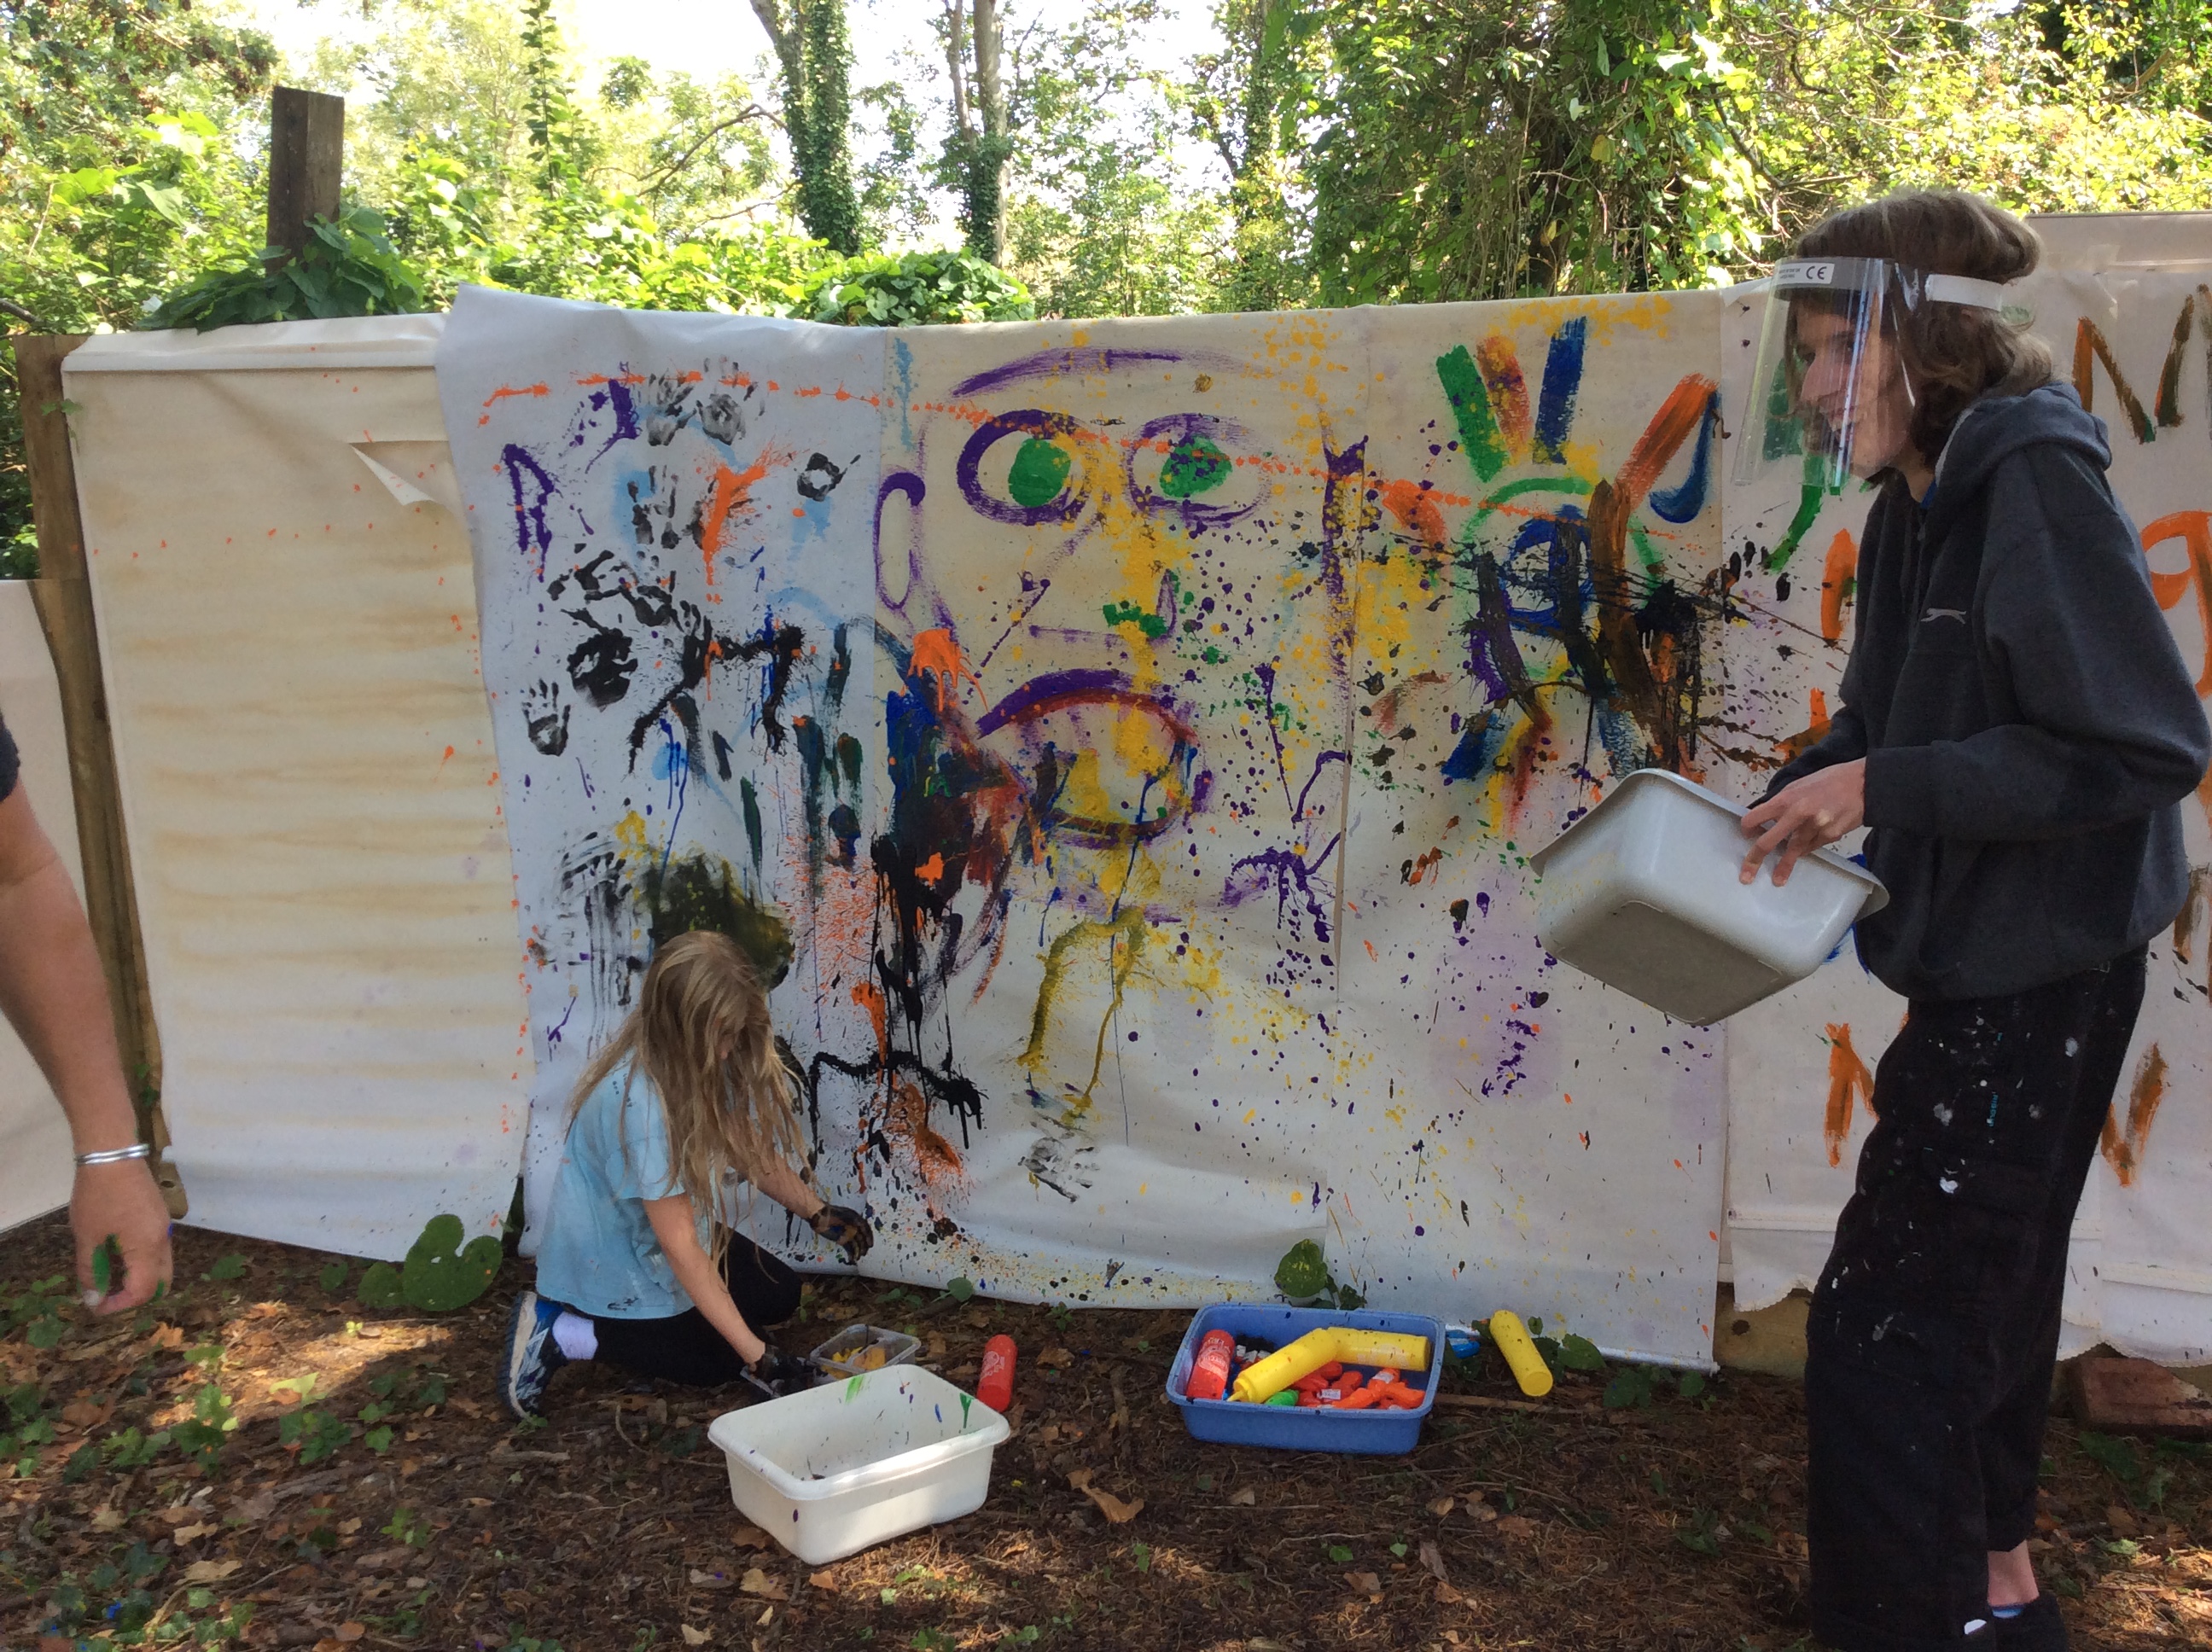 A young person and a child enjoy a painting activity in the garden at Demelza East Sussex site.